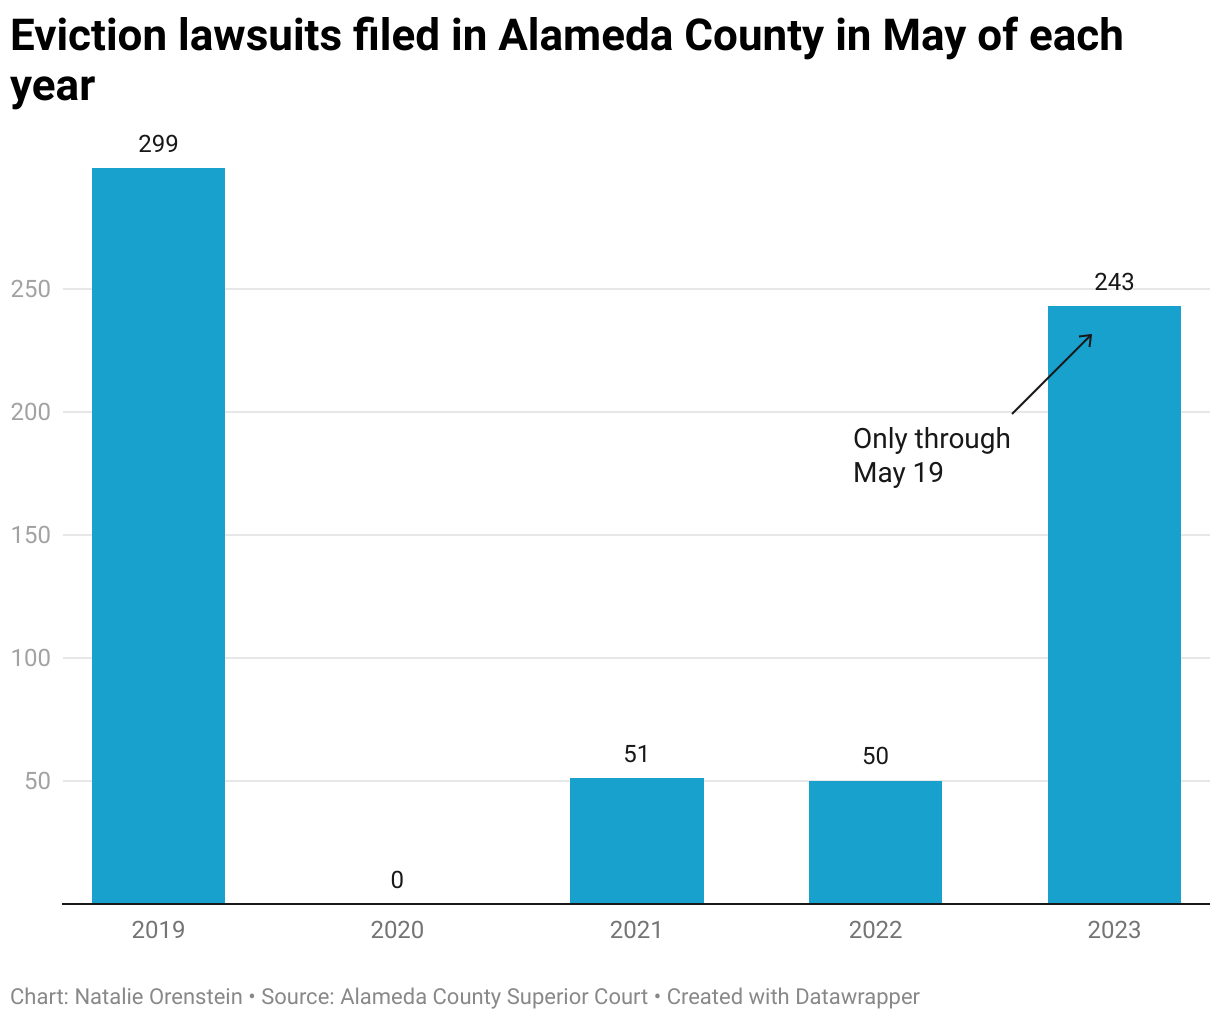 Bar chart showing that eviction rates have climbed close to 2019 levels in May 2023, after a sharp dip from 2020 to 2022.